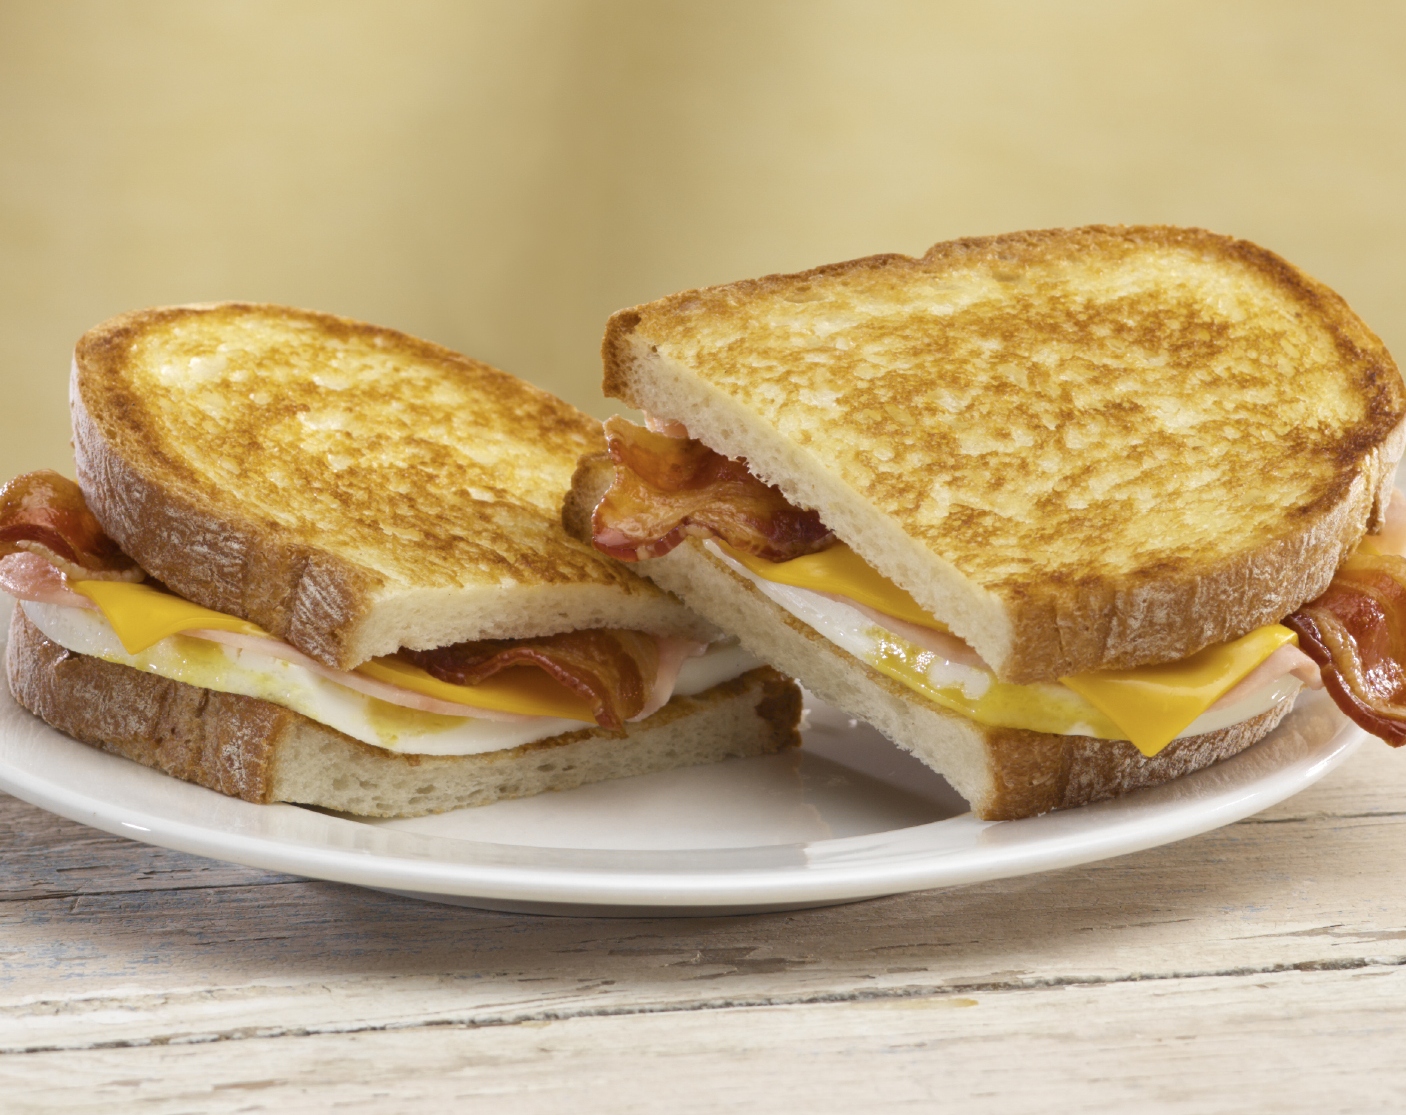 Grilled Breakfast Sandwich from Jack-in-the-box. With two freshly cracked eggs, two slices of ham, two strips of bacon and two slices of melting American cheese all on grilled artisan bread.